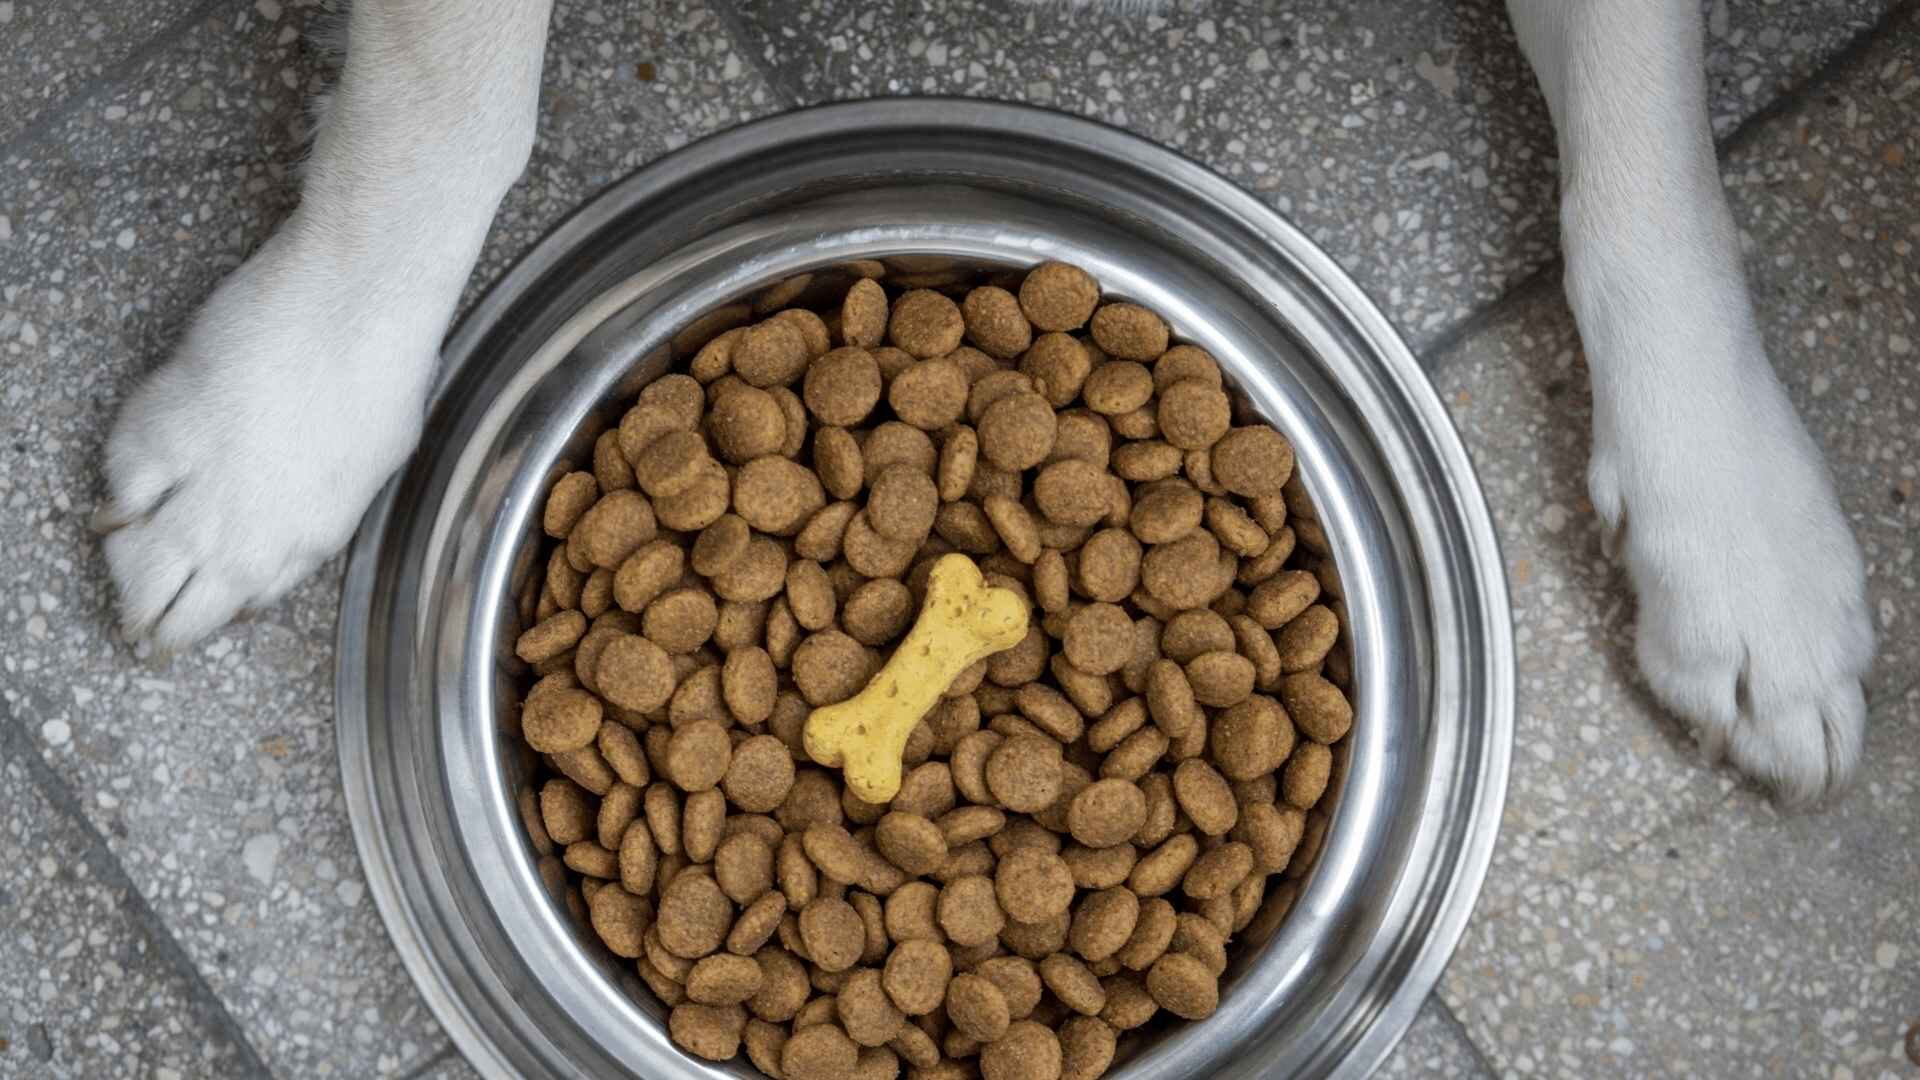 Why Is My Puppy Doesn't Chew Kibble: What Should I Do Guide